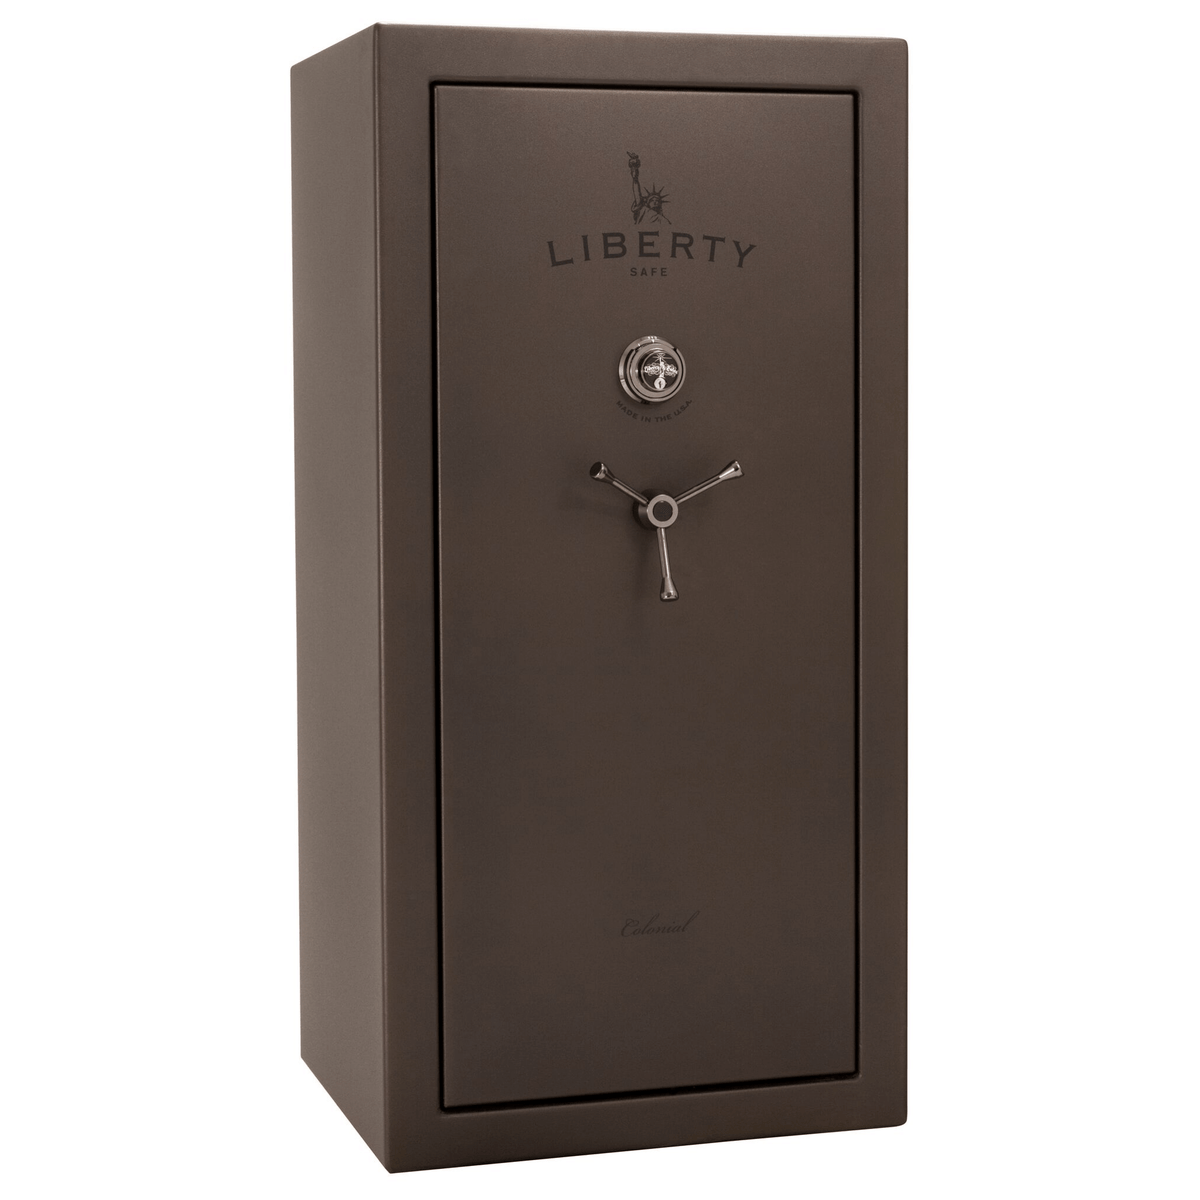 Liberty Colonial 23 Safe in Textured Bronze with Black Chrome Mechanical Lock.